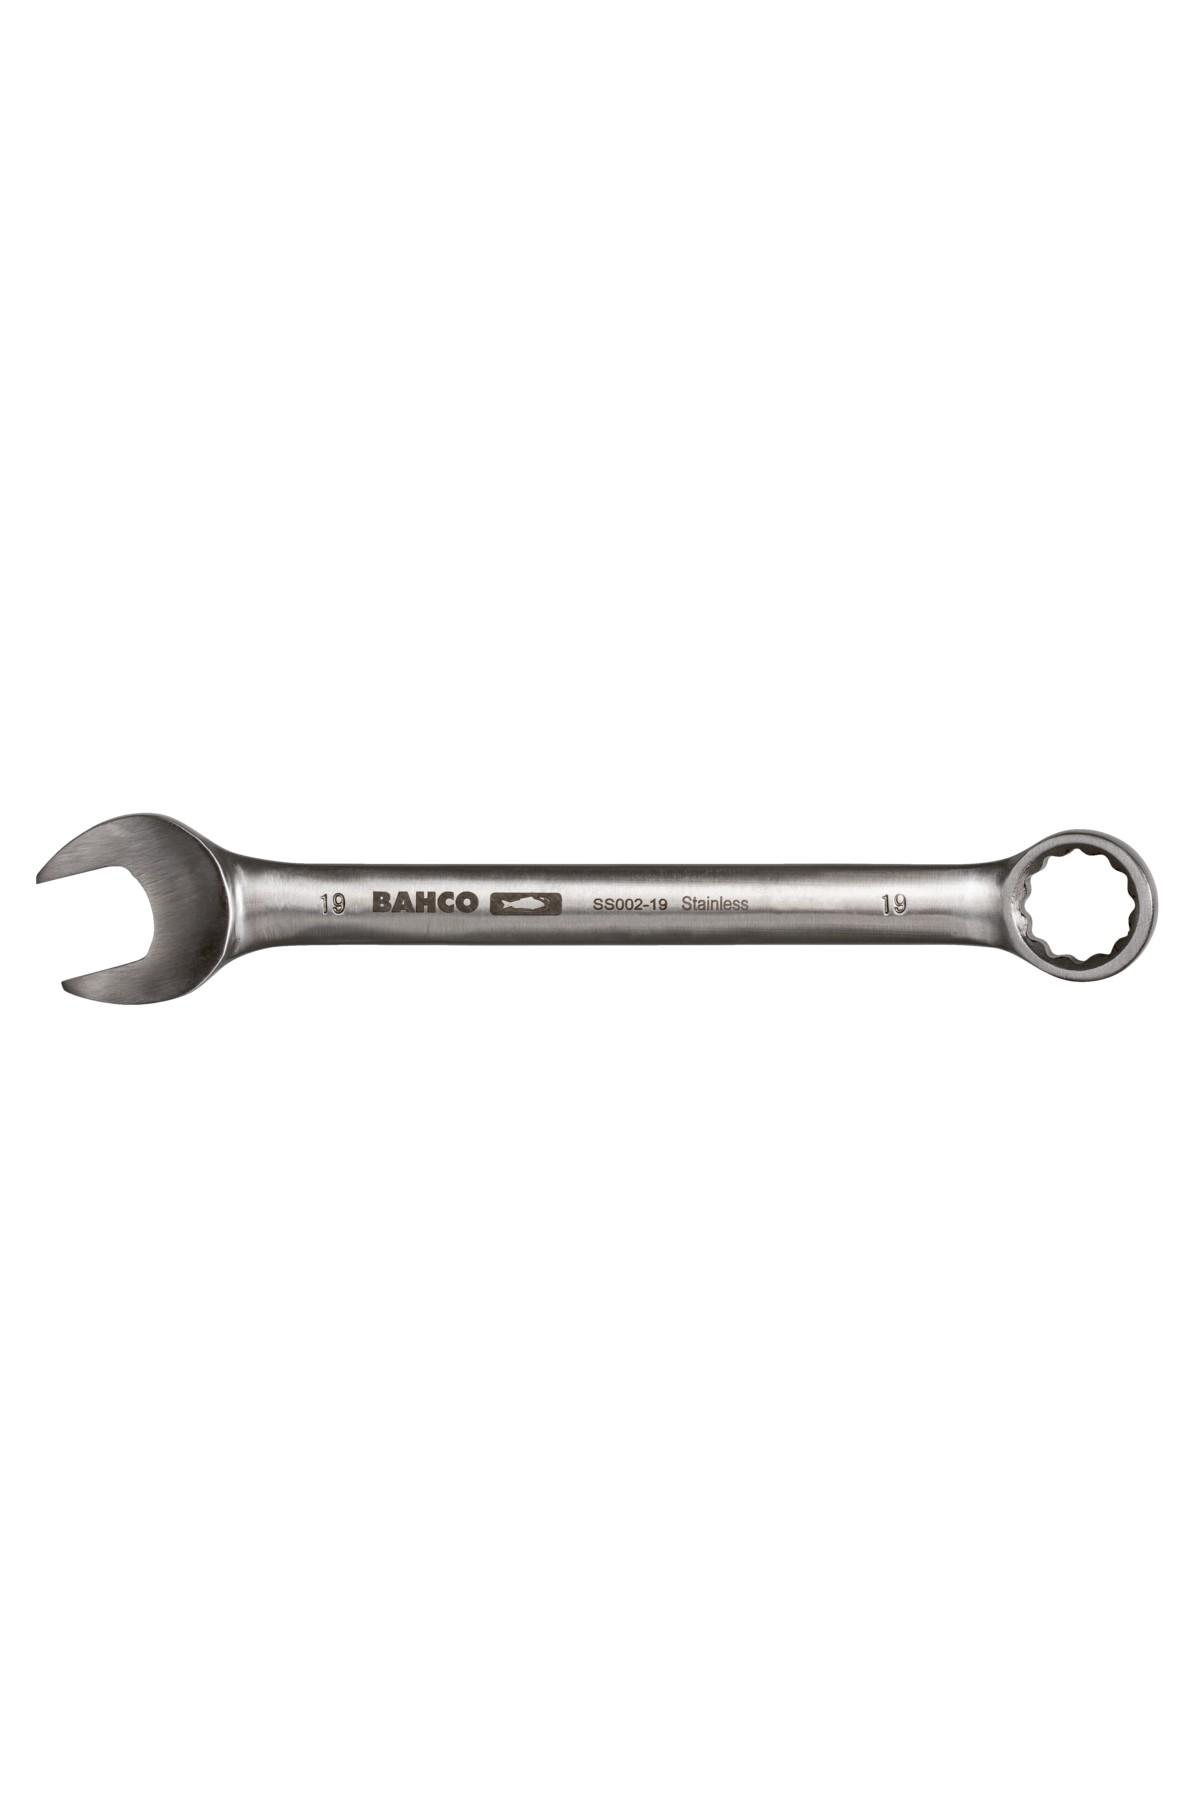 Ring spanner stainless steel SS003 5/16